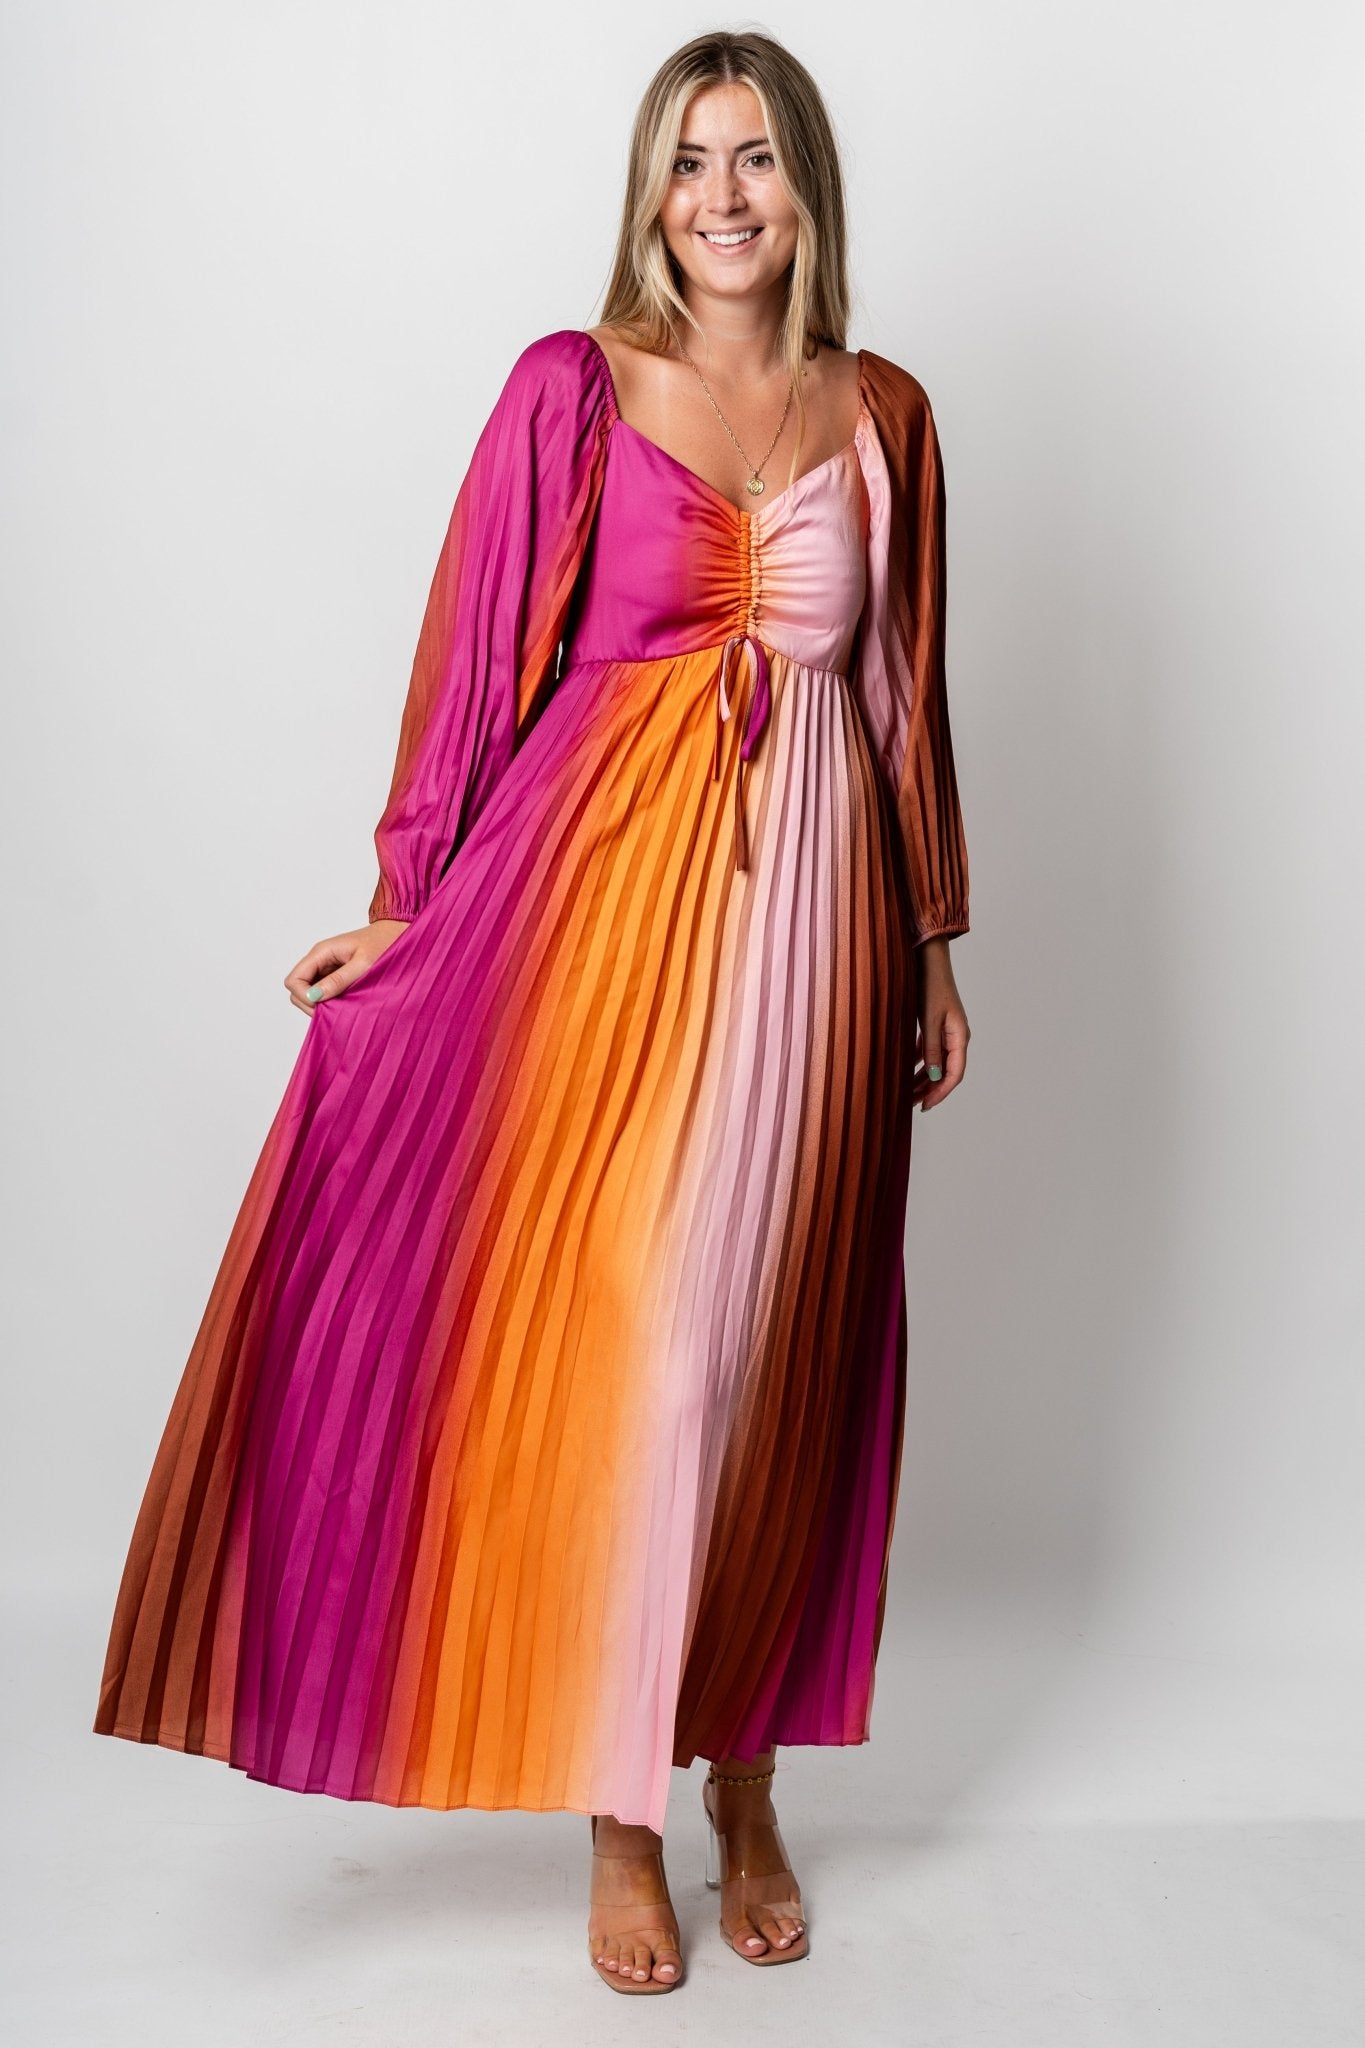 Pleated maxi dress mango orchid - Trendy Dresses - Fashion Dresses at Lush Fashion Lounge Boutique in Oklahoma City